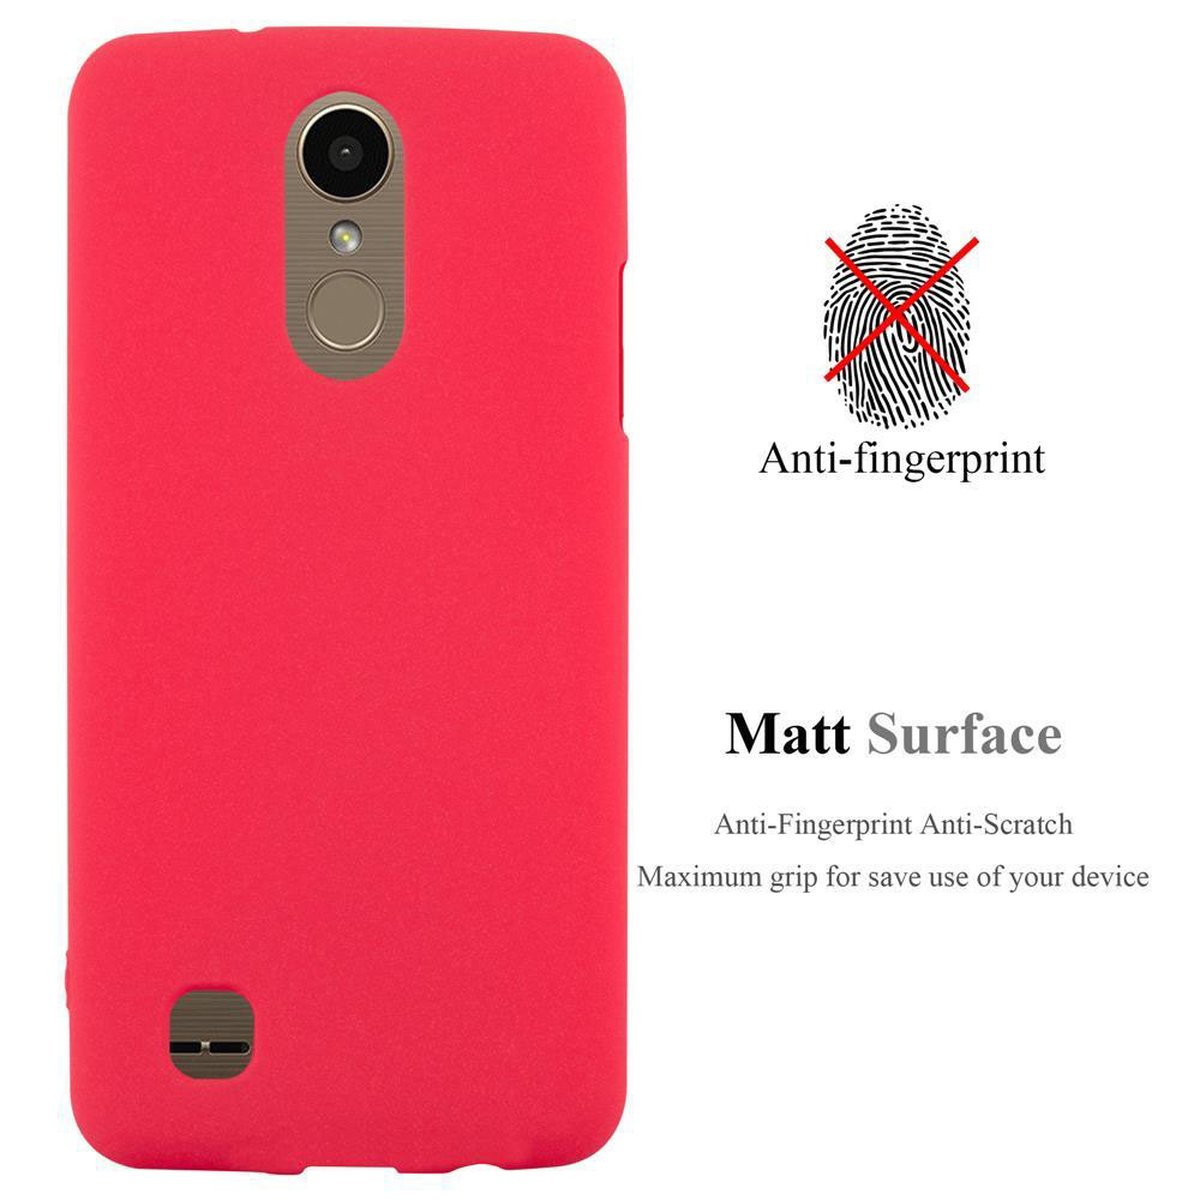 Backcover, K10 LG, Schutzhülle, ROT 2017, Frosted FROST CADORABO TPU